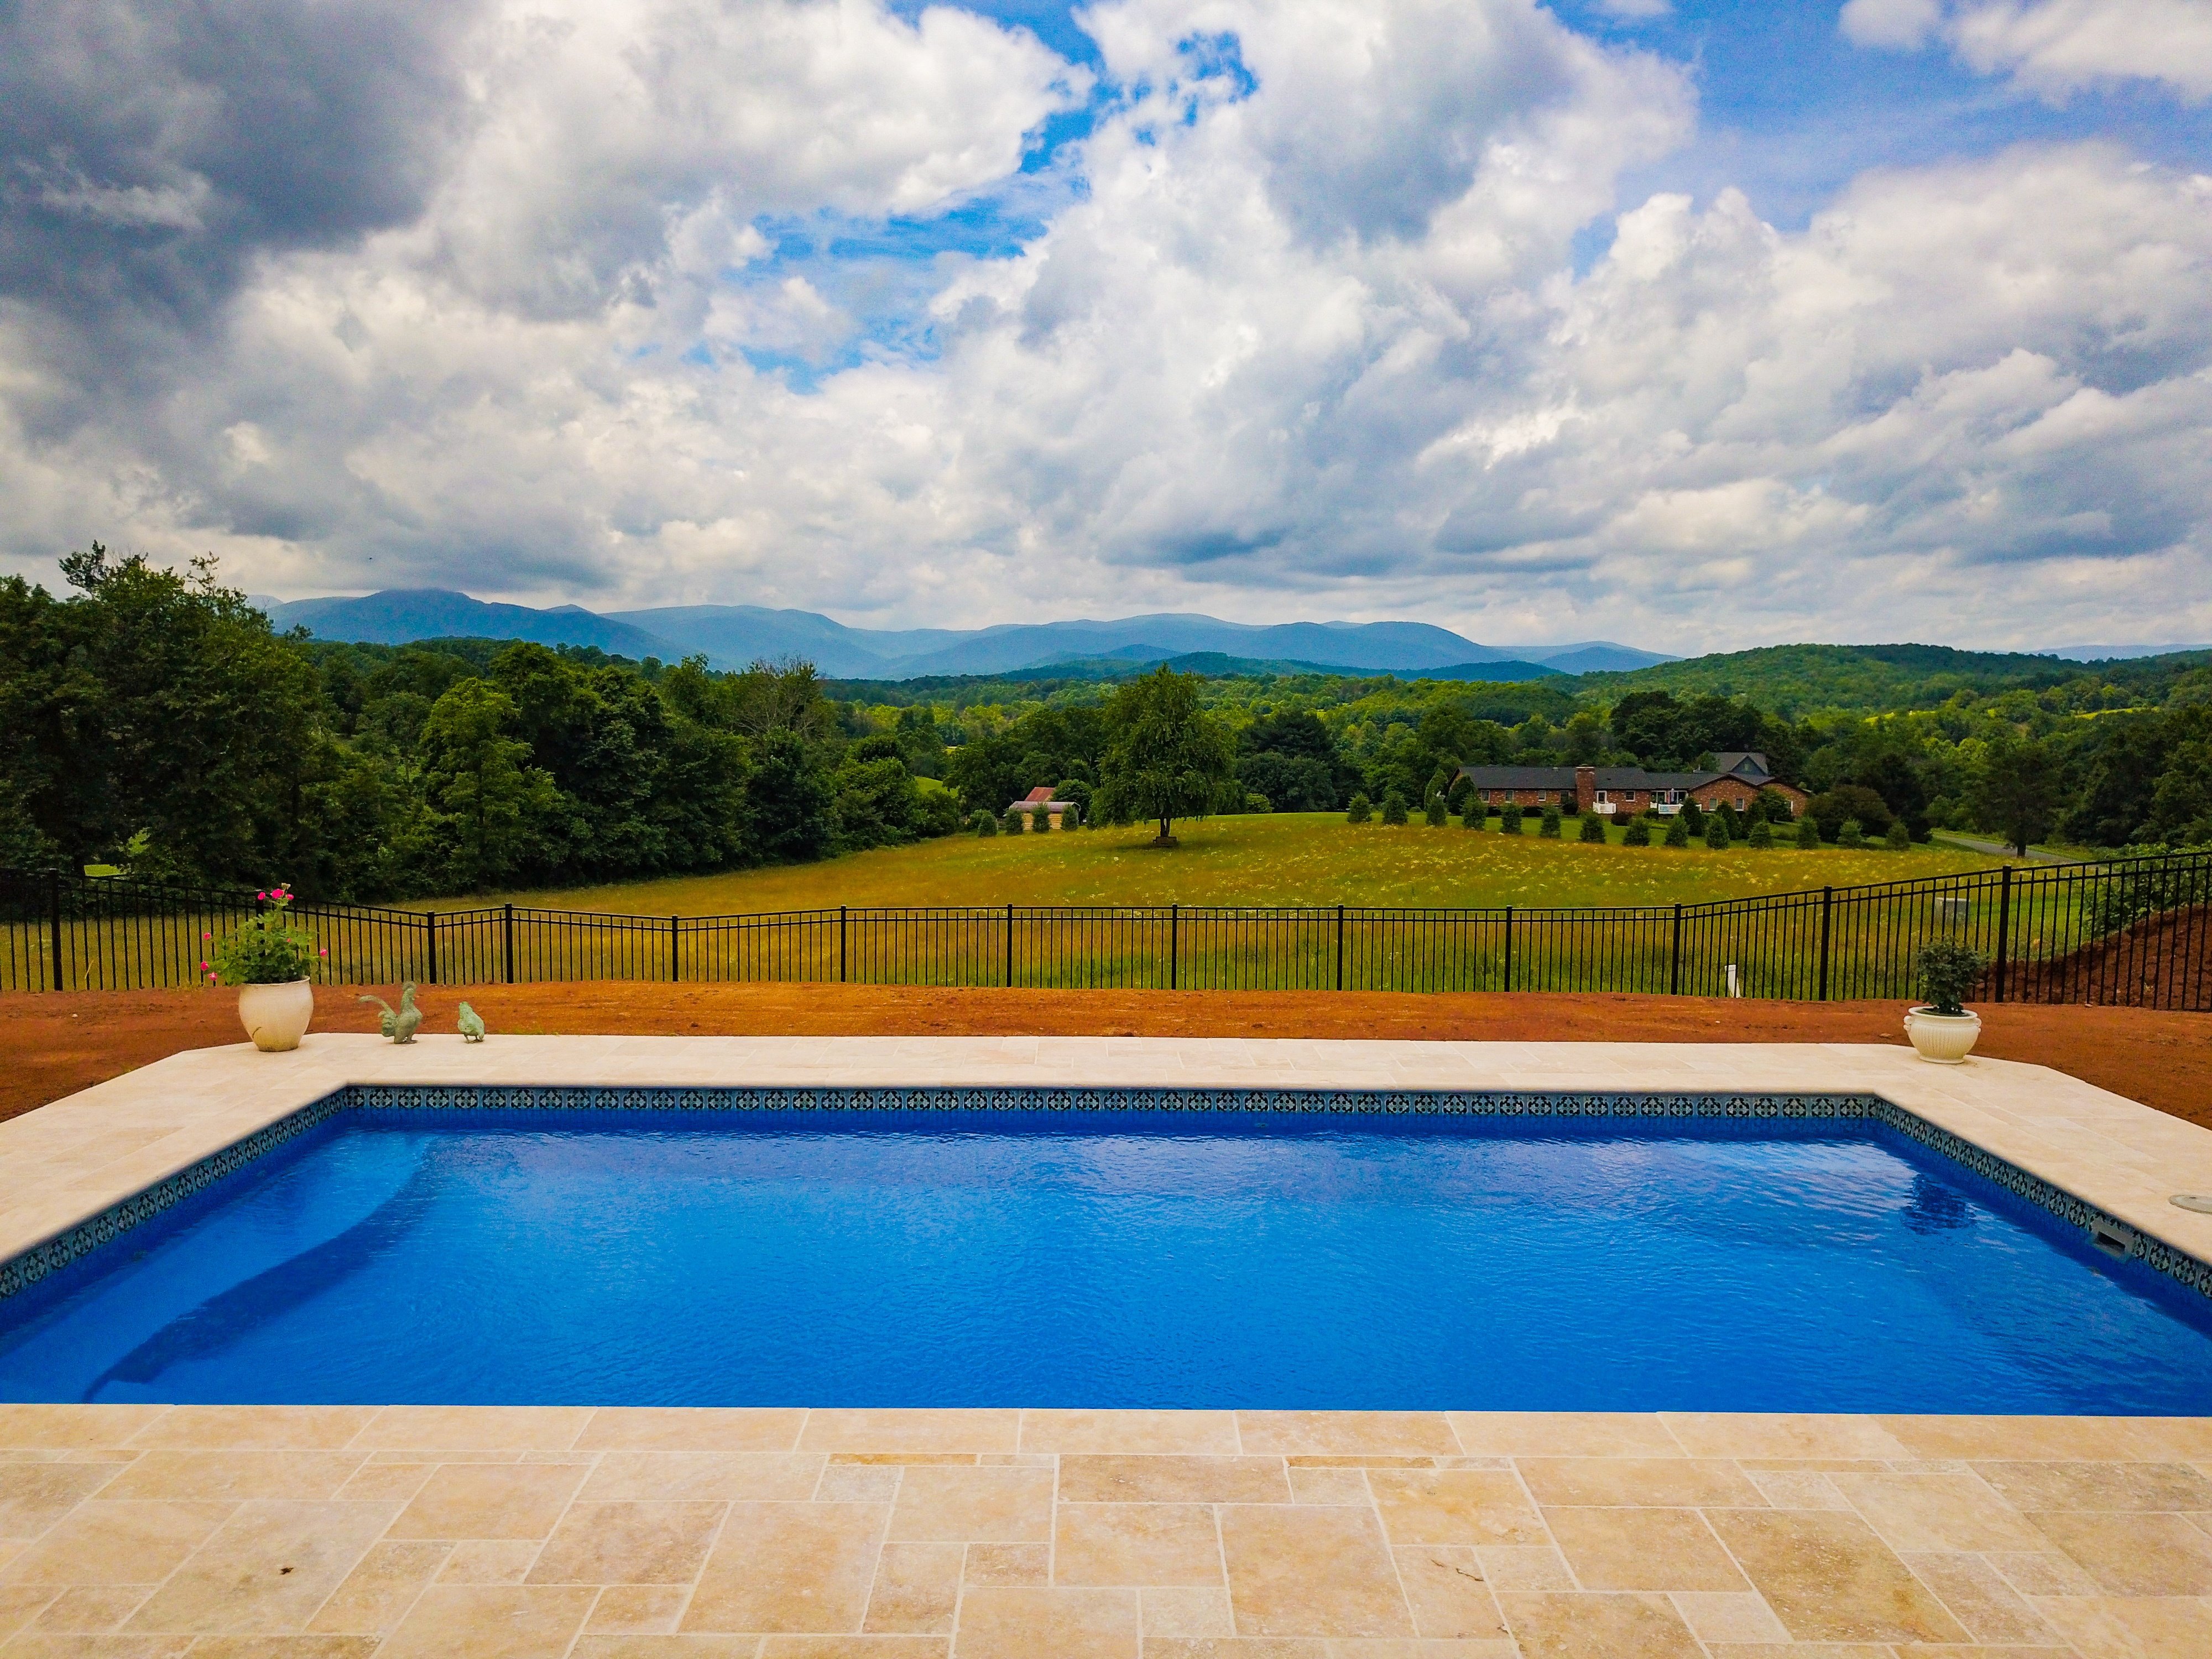 R40 Series pool with the picturesque blue ridge mountains in the background